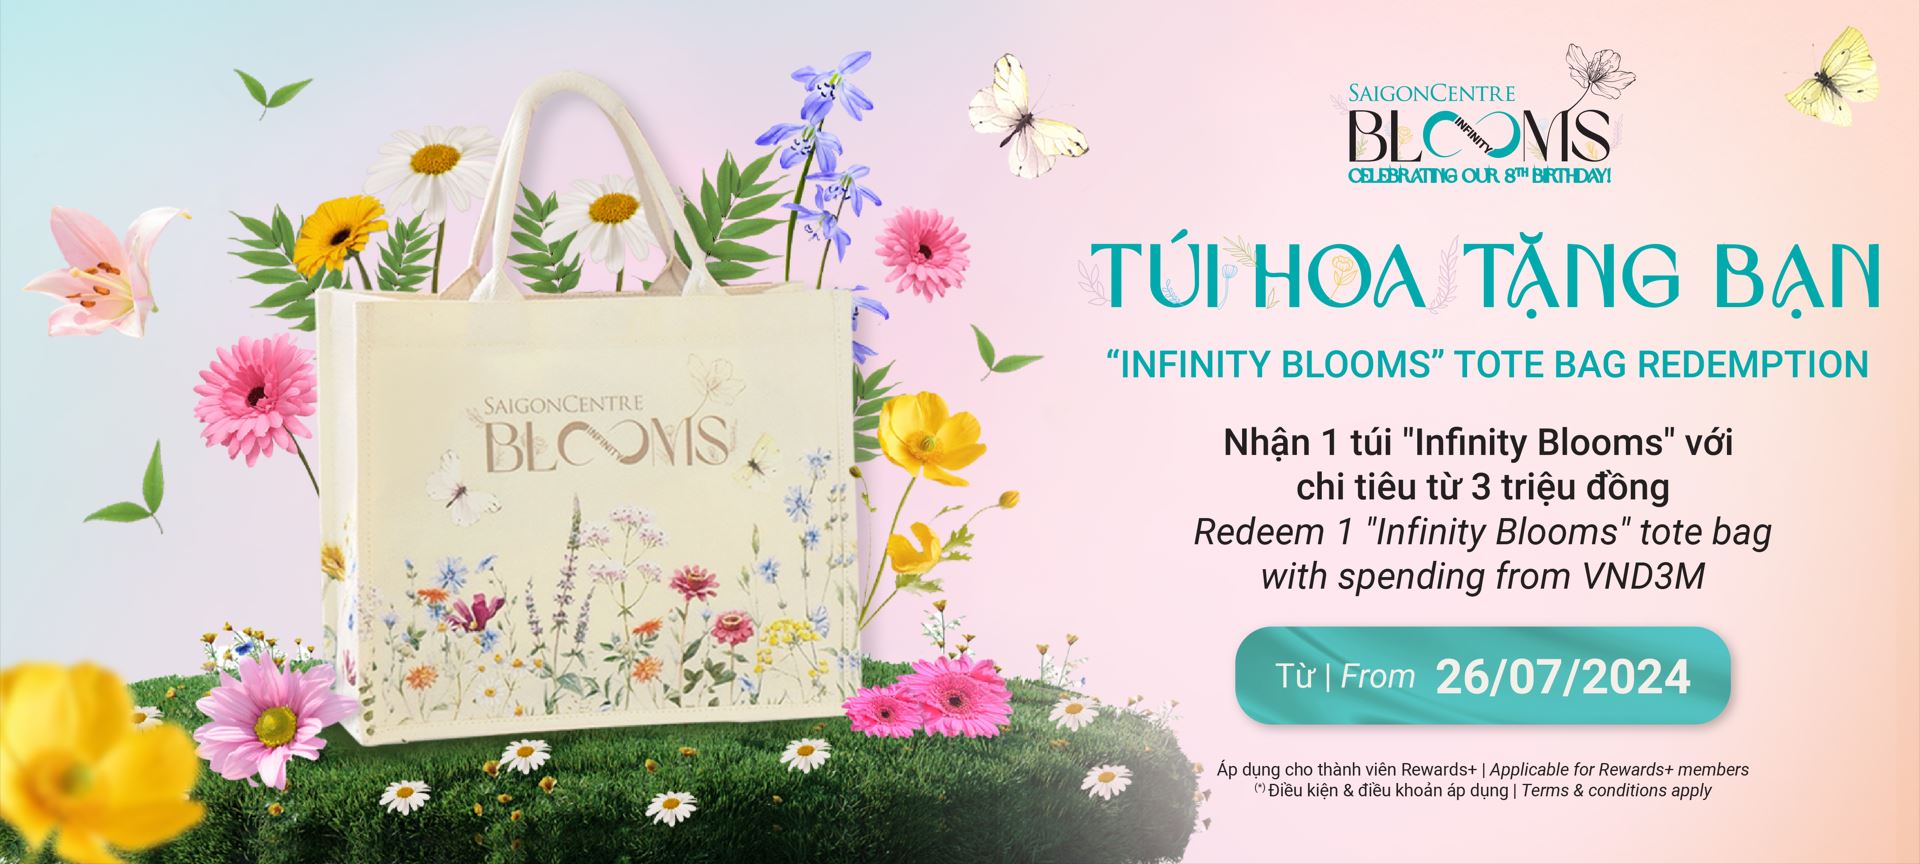 "INFINITY BLOOMS" TOTE BAG REDEMPTION